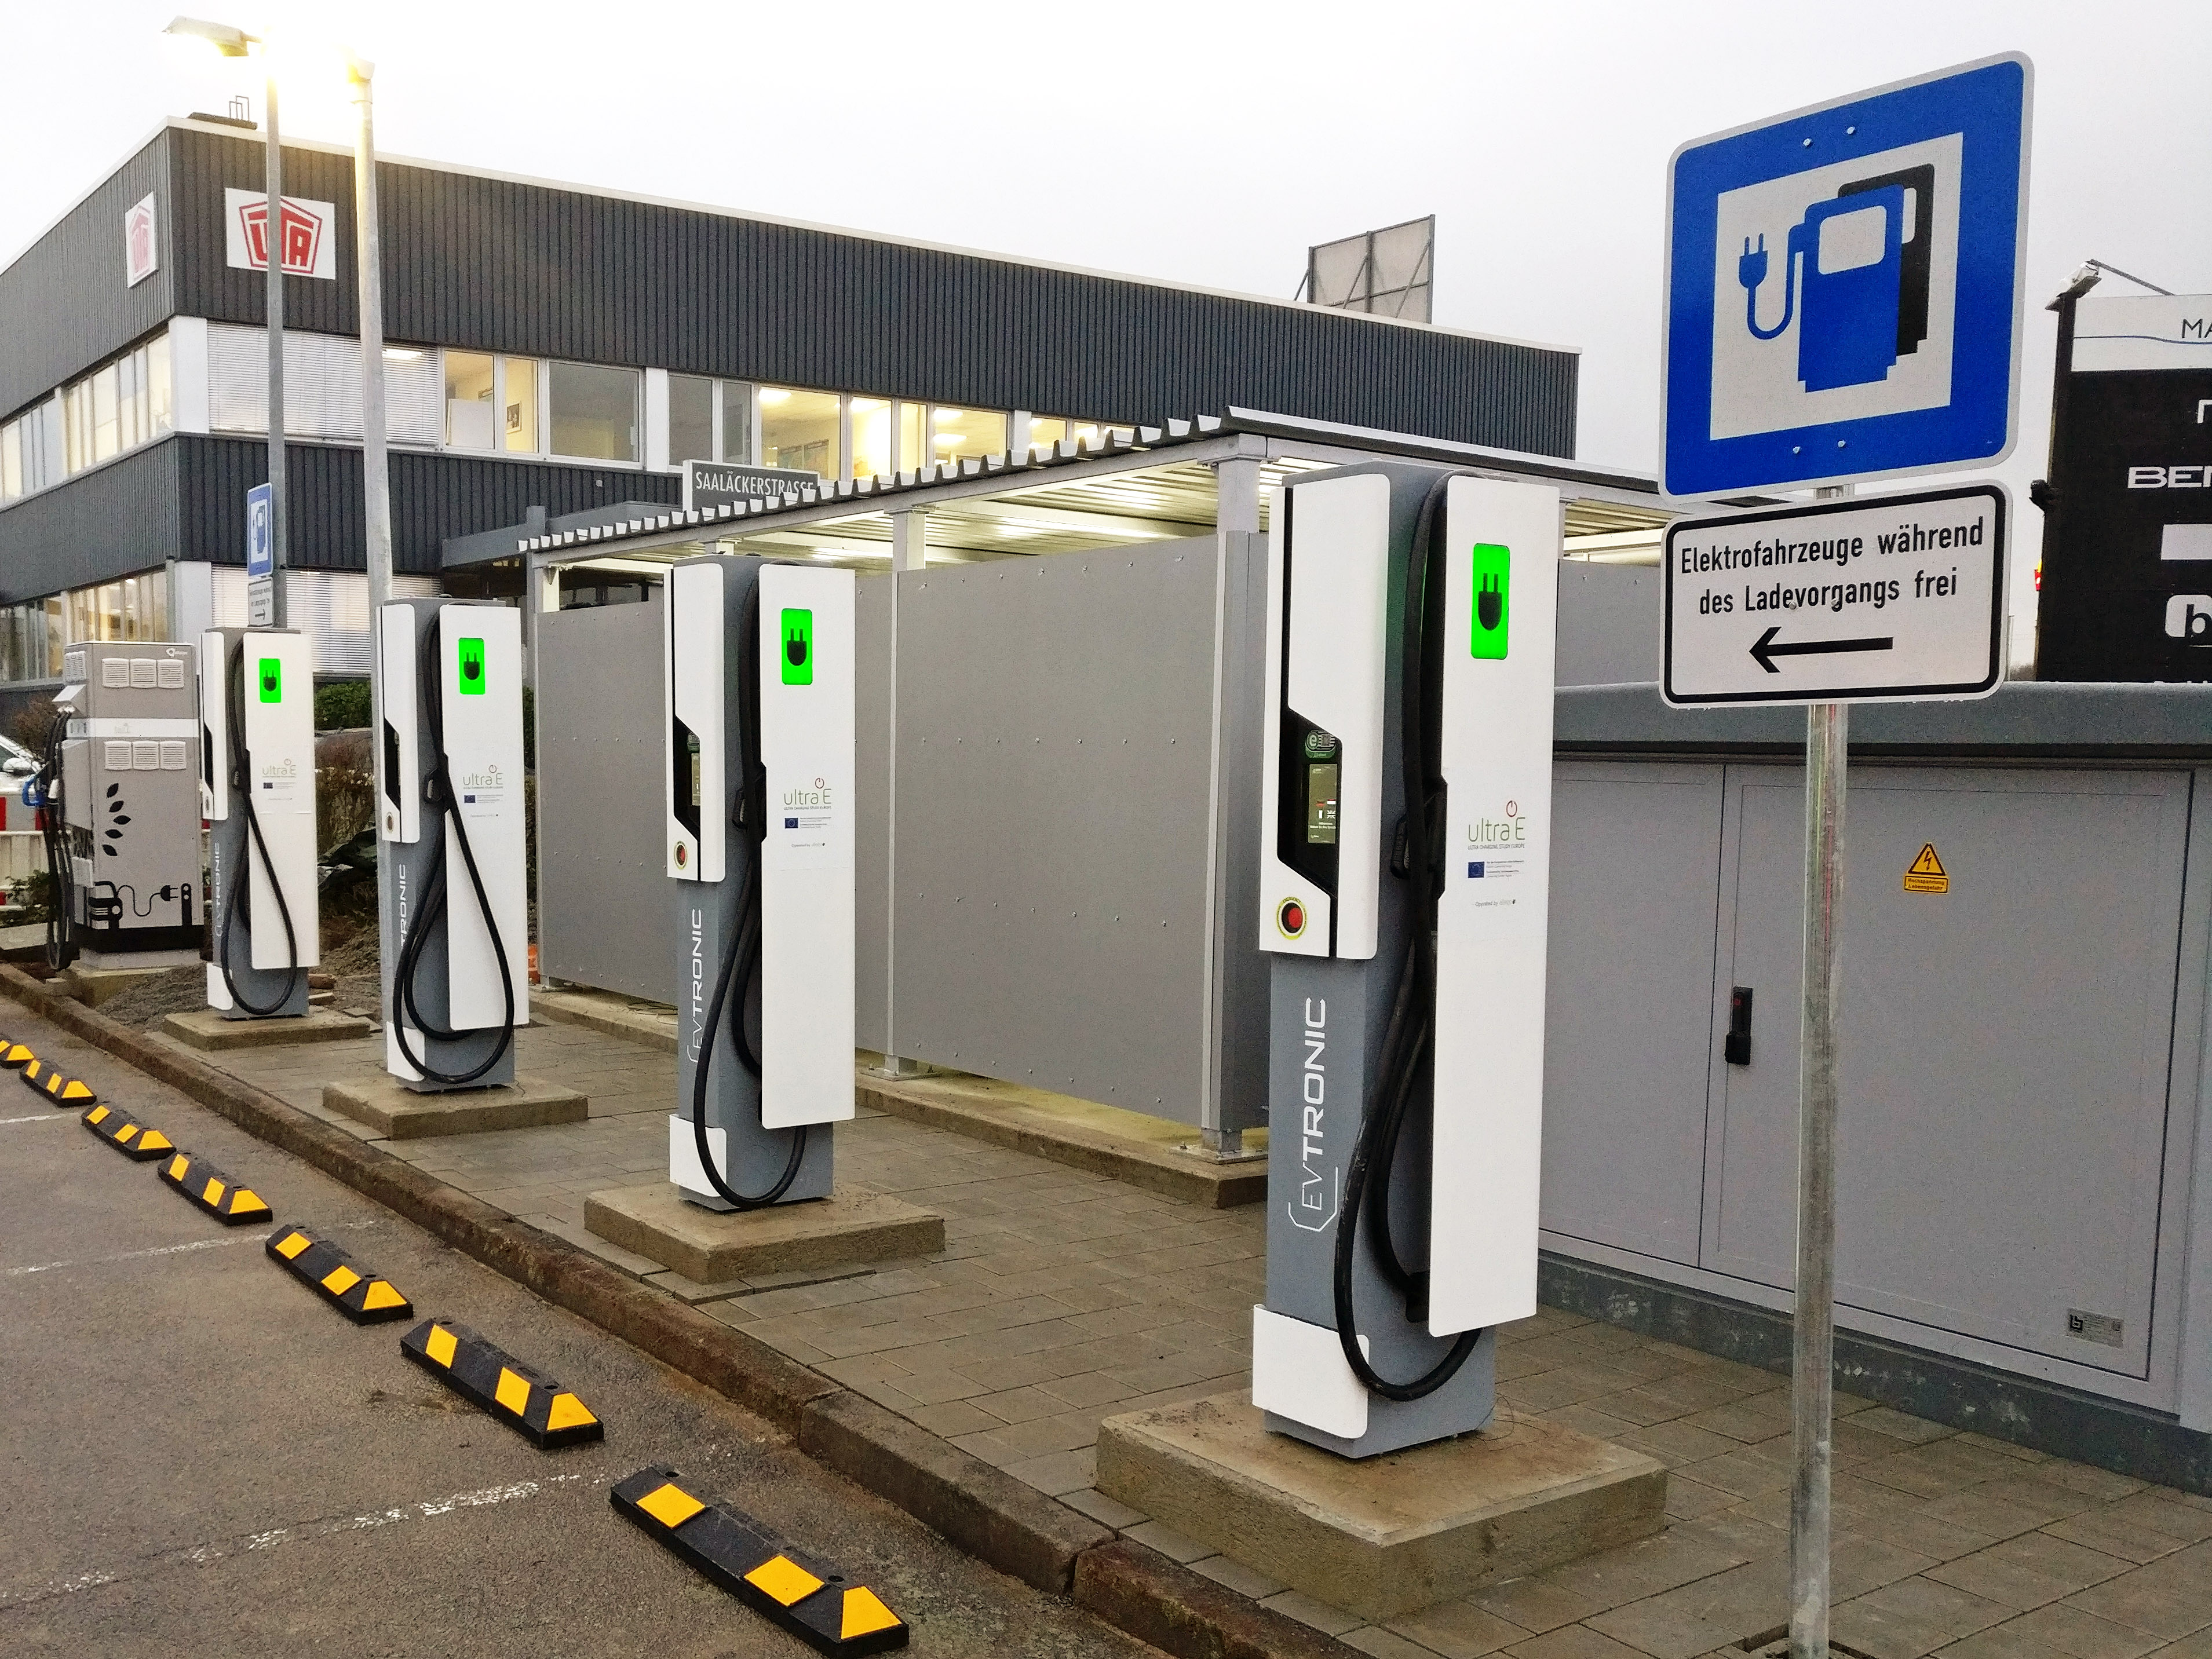 First 'ultra-fast' electric car charging station comes online in Europe - Electrek